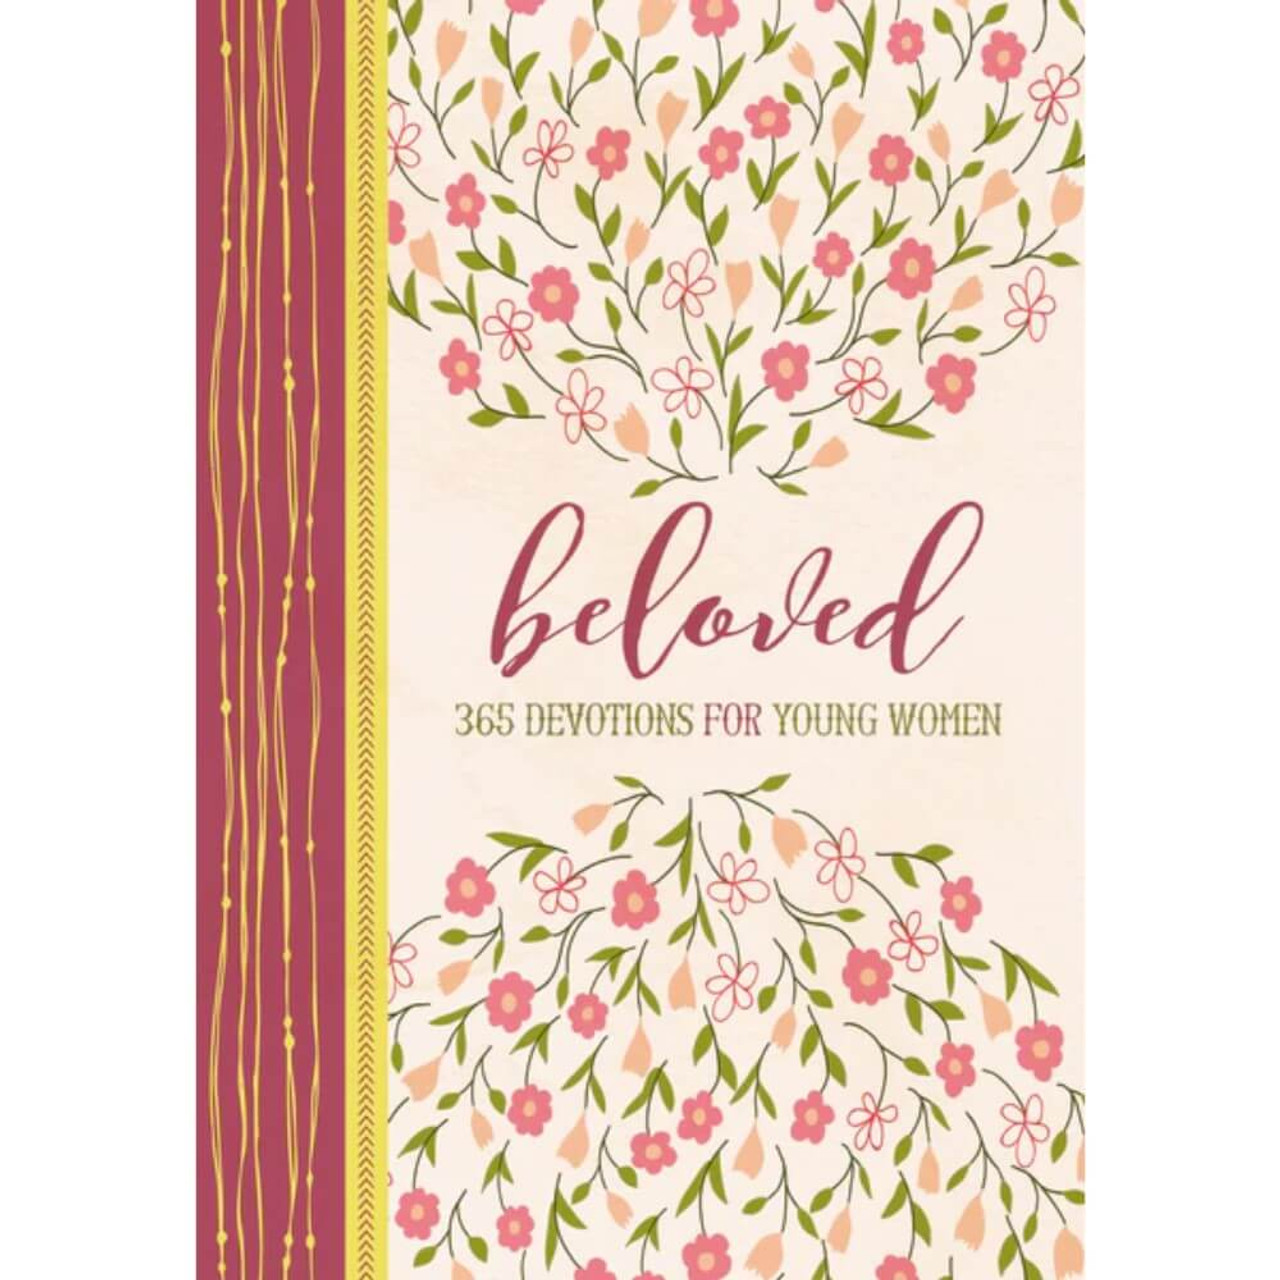 Beloved 365 Devotions for Young Women